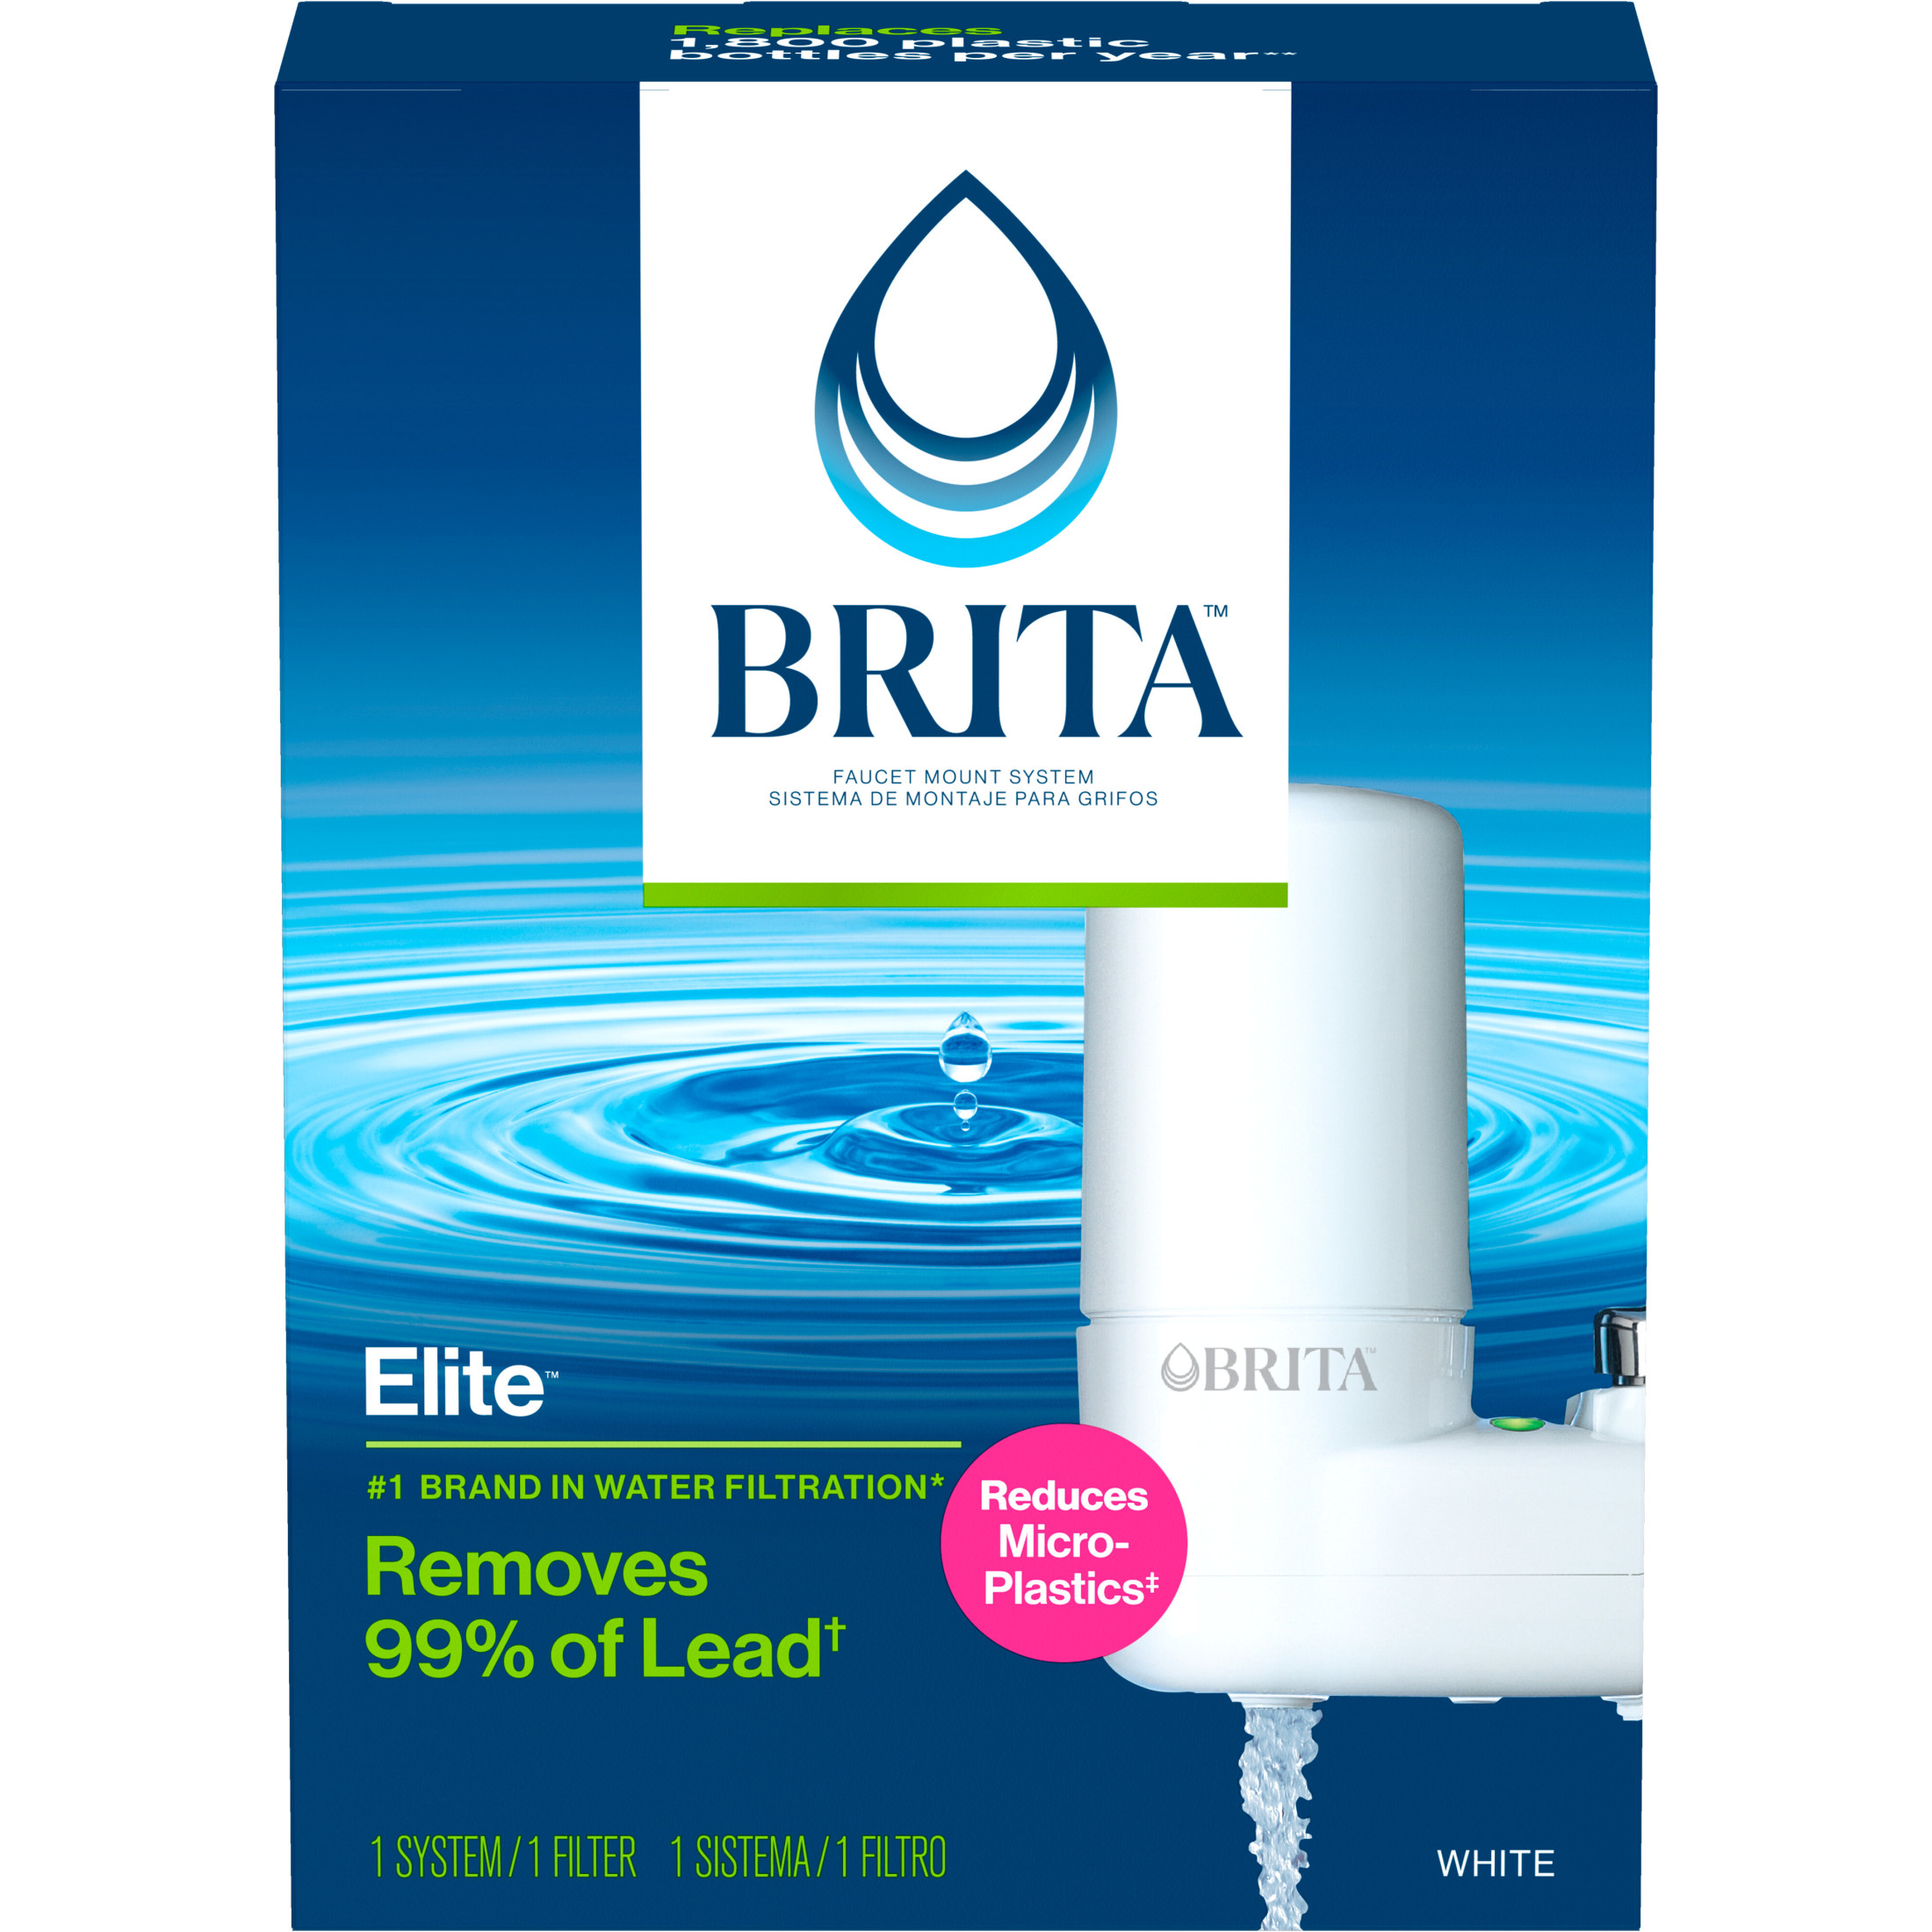 Brita Basic Faucet Mount System, Water Filter Reduces Lead and Chlorine, White - image 2 of 4